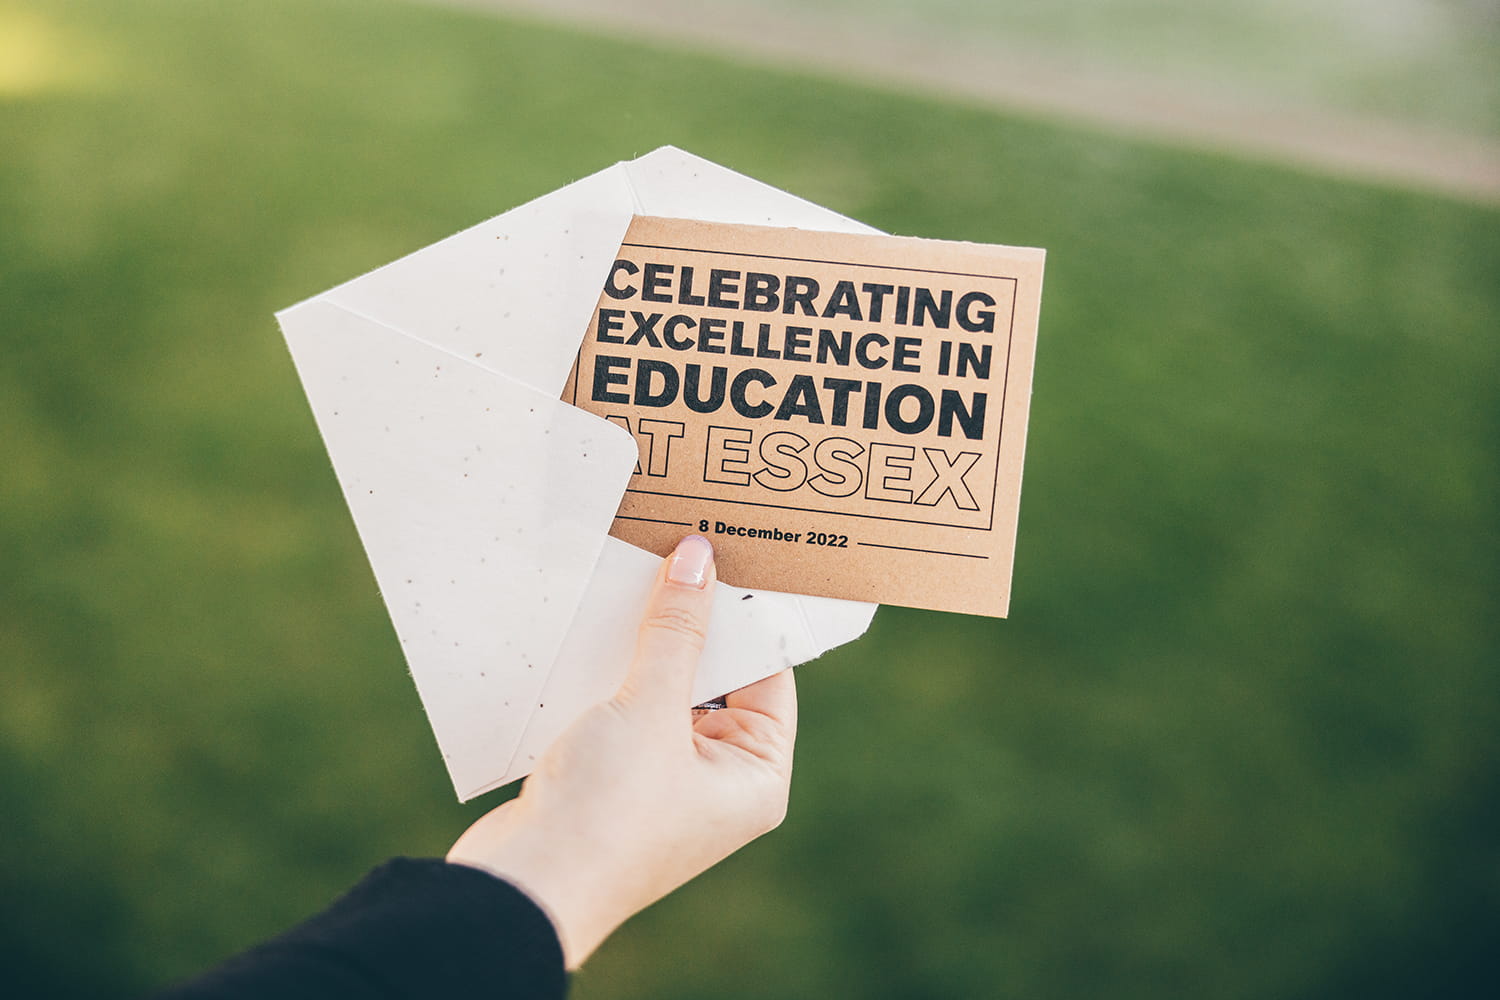 Excellence in Education Award